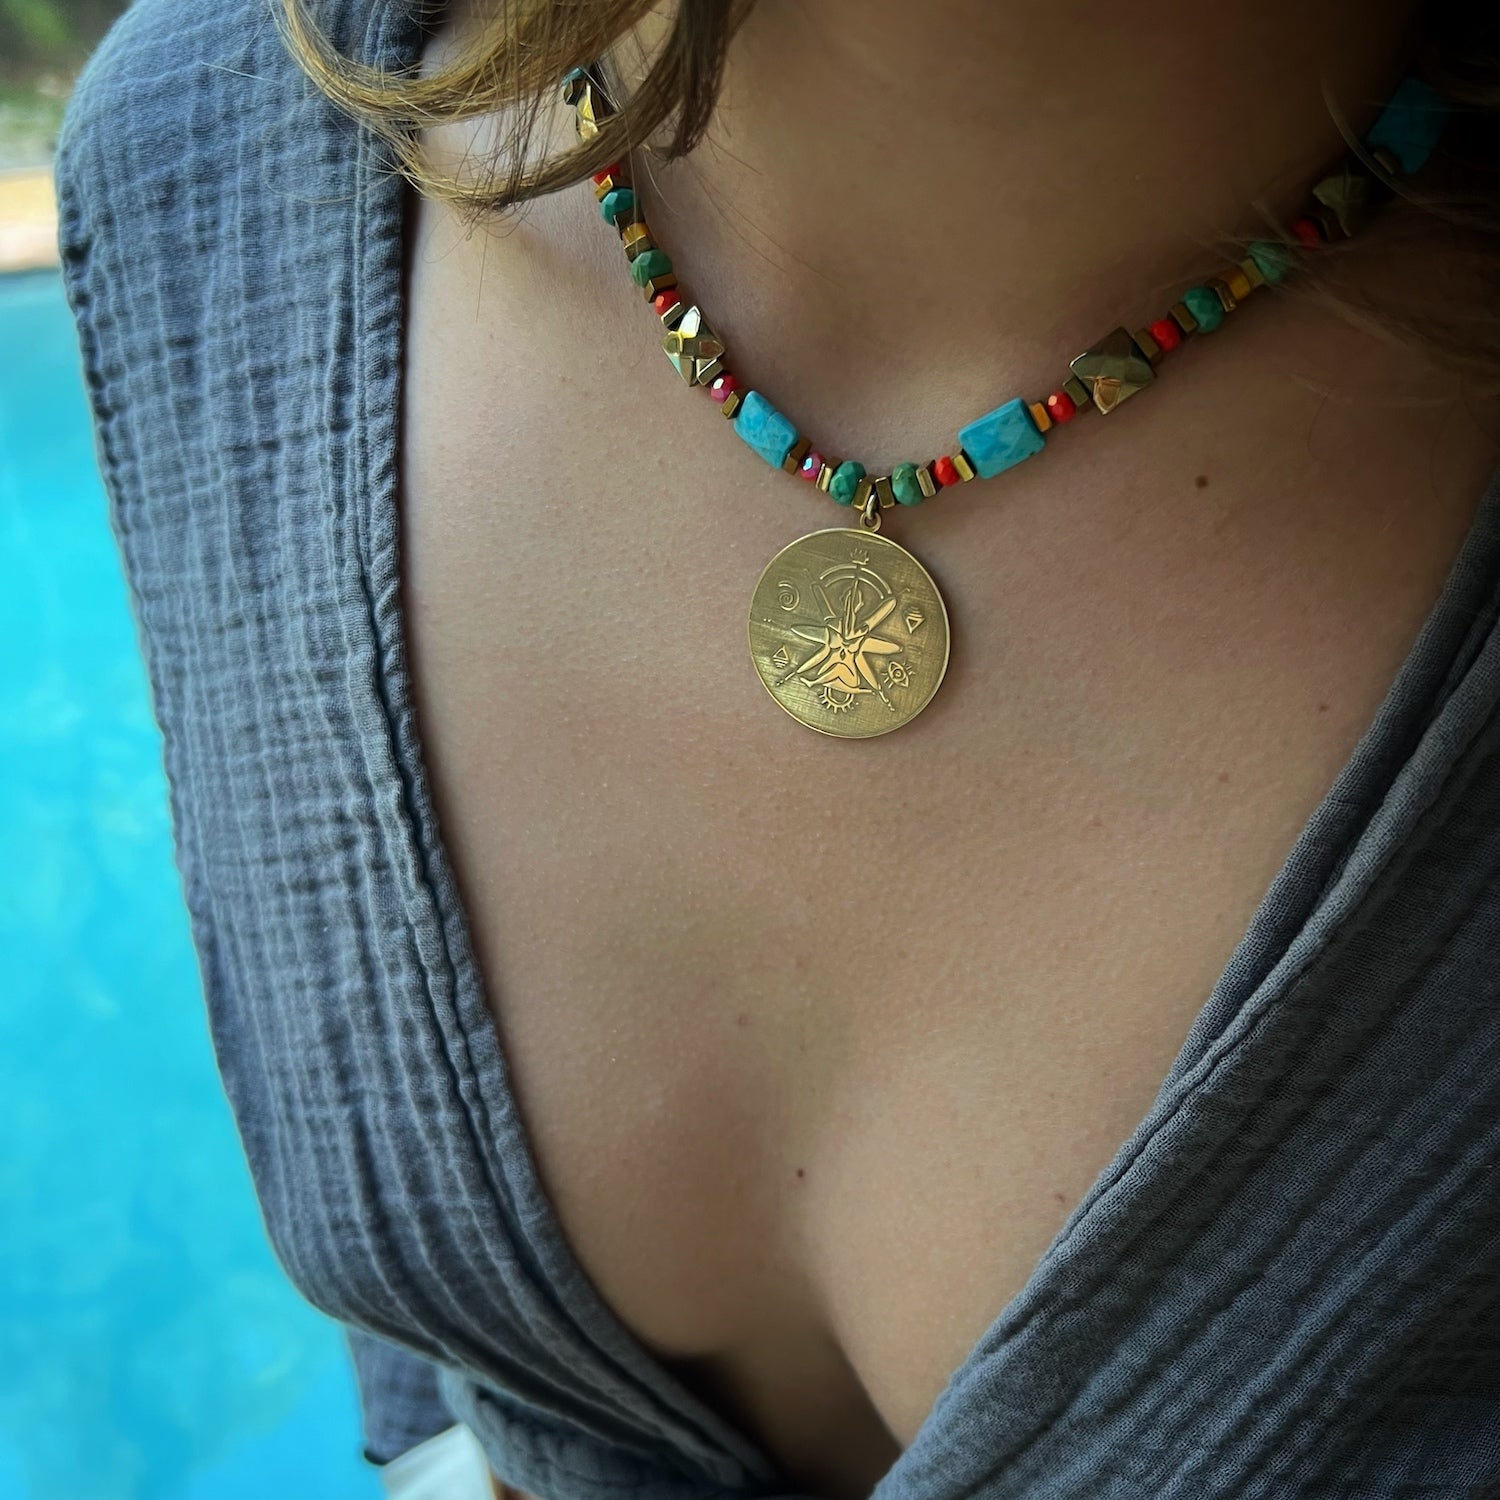 Channeling Positive Energy - Our model showcases the See The Good Unique Necklace.